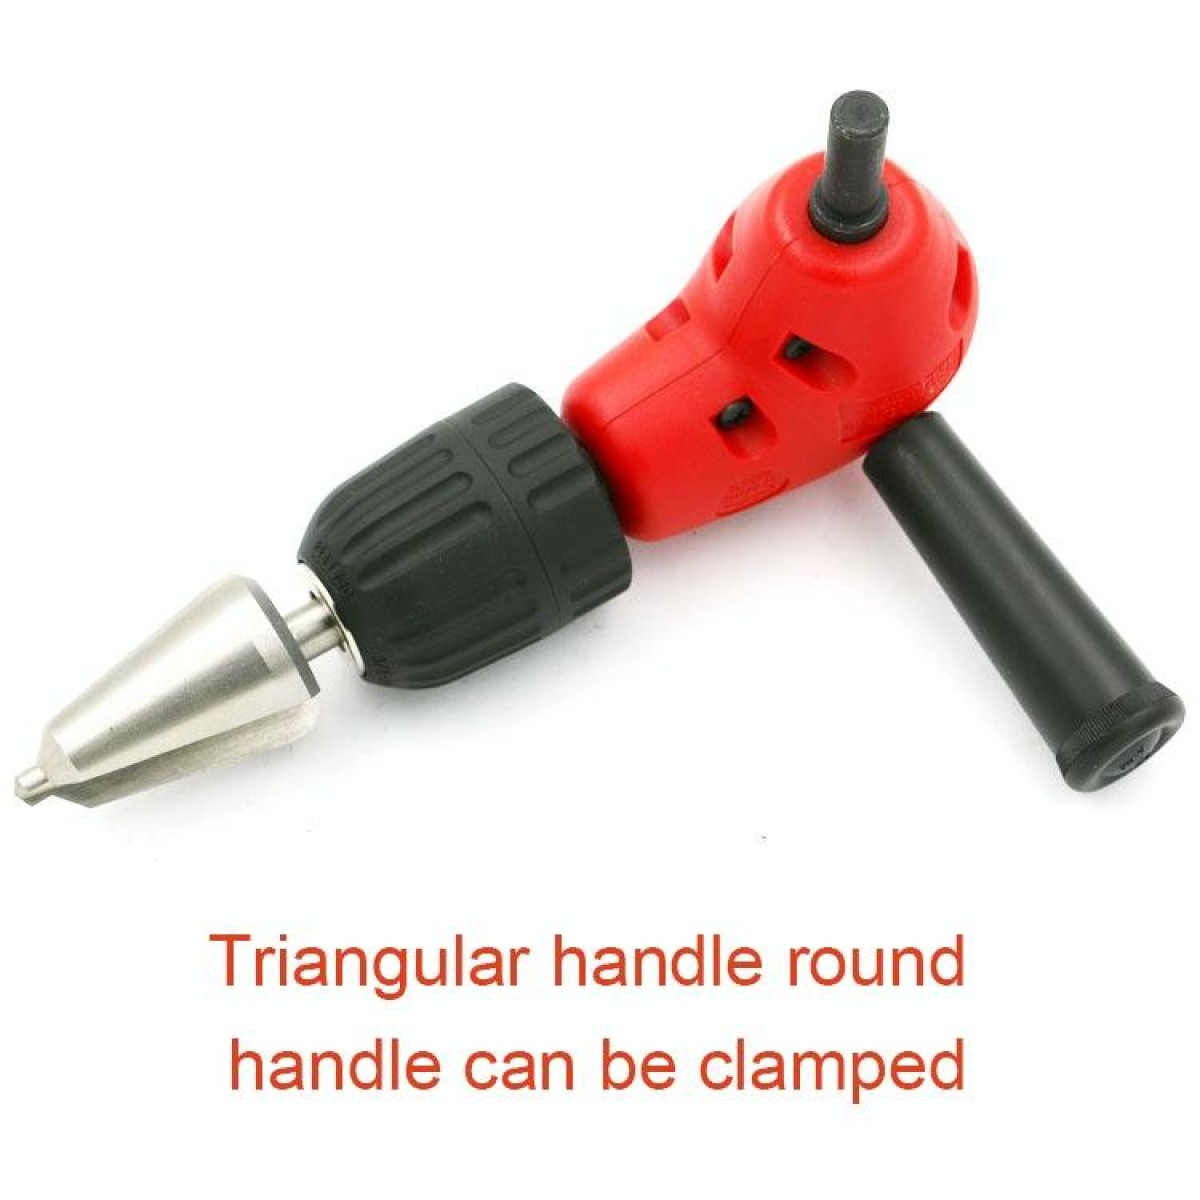 Adjustable Switching Head Right Angle Drill Gripping with Triangular Handle, Circular Handle and Hex Shank